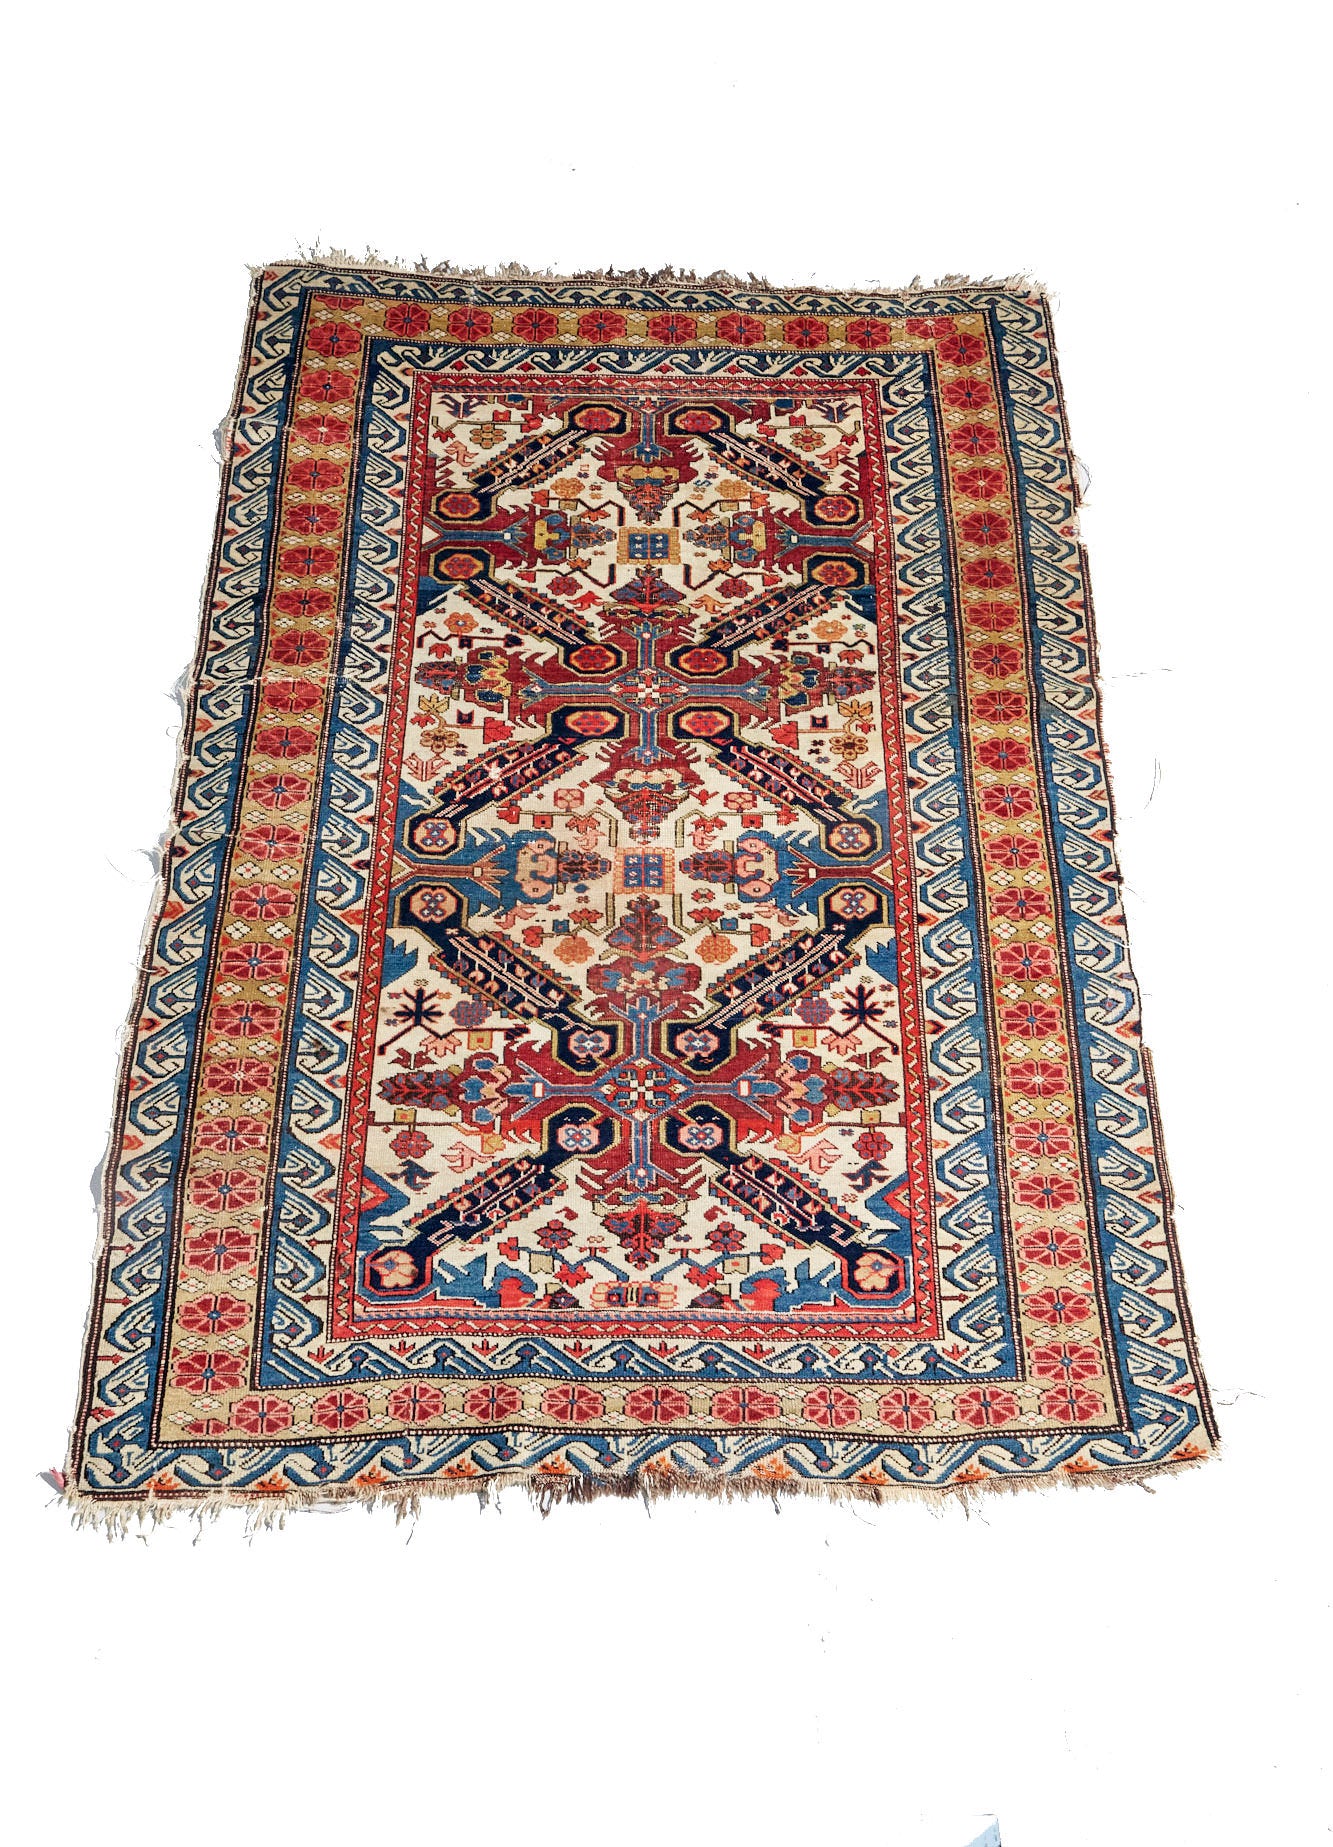 Exquisite, intricately woven Zeychour Persian rug. Vibrant red and deep blue medallions with floral motifs throughout and border with red flowers and blue and white wave pattern. Perfect for living room, bedroom or dining room or as wall hanging. Available from King Kennedy Rugs Los Angeles